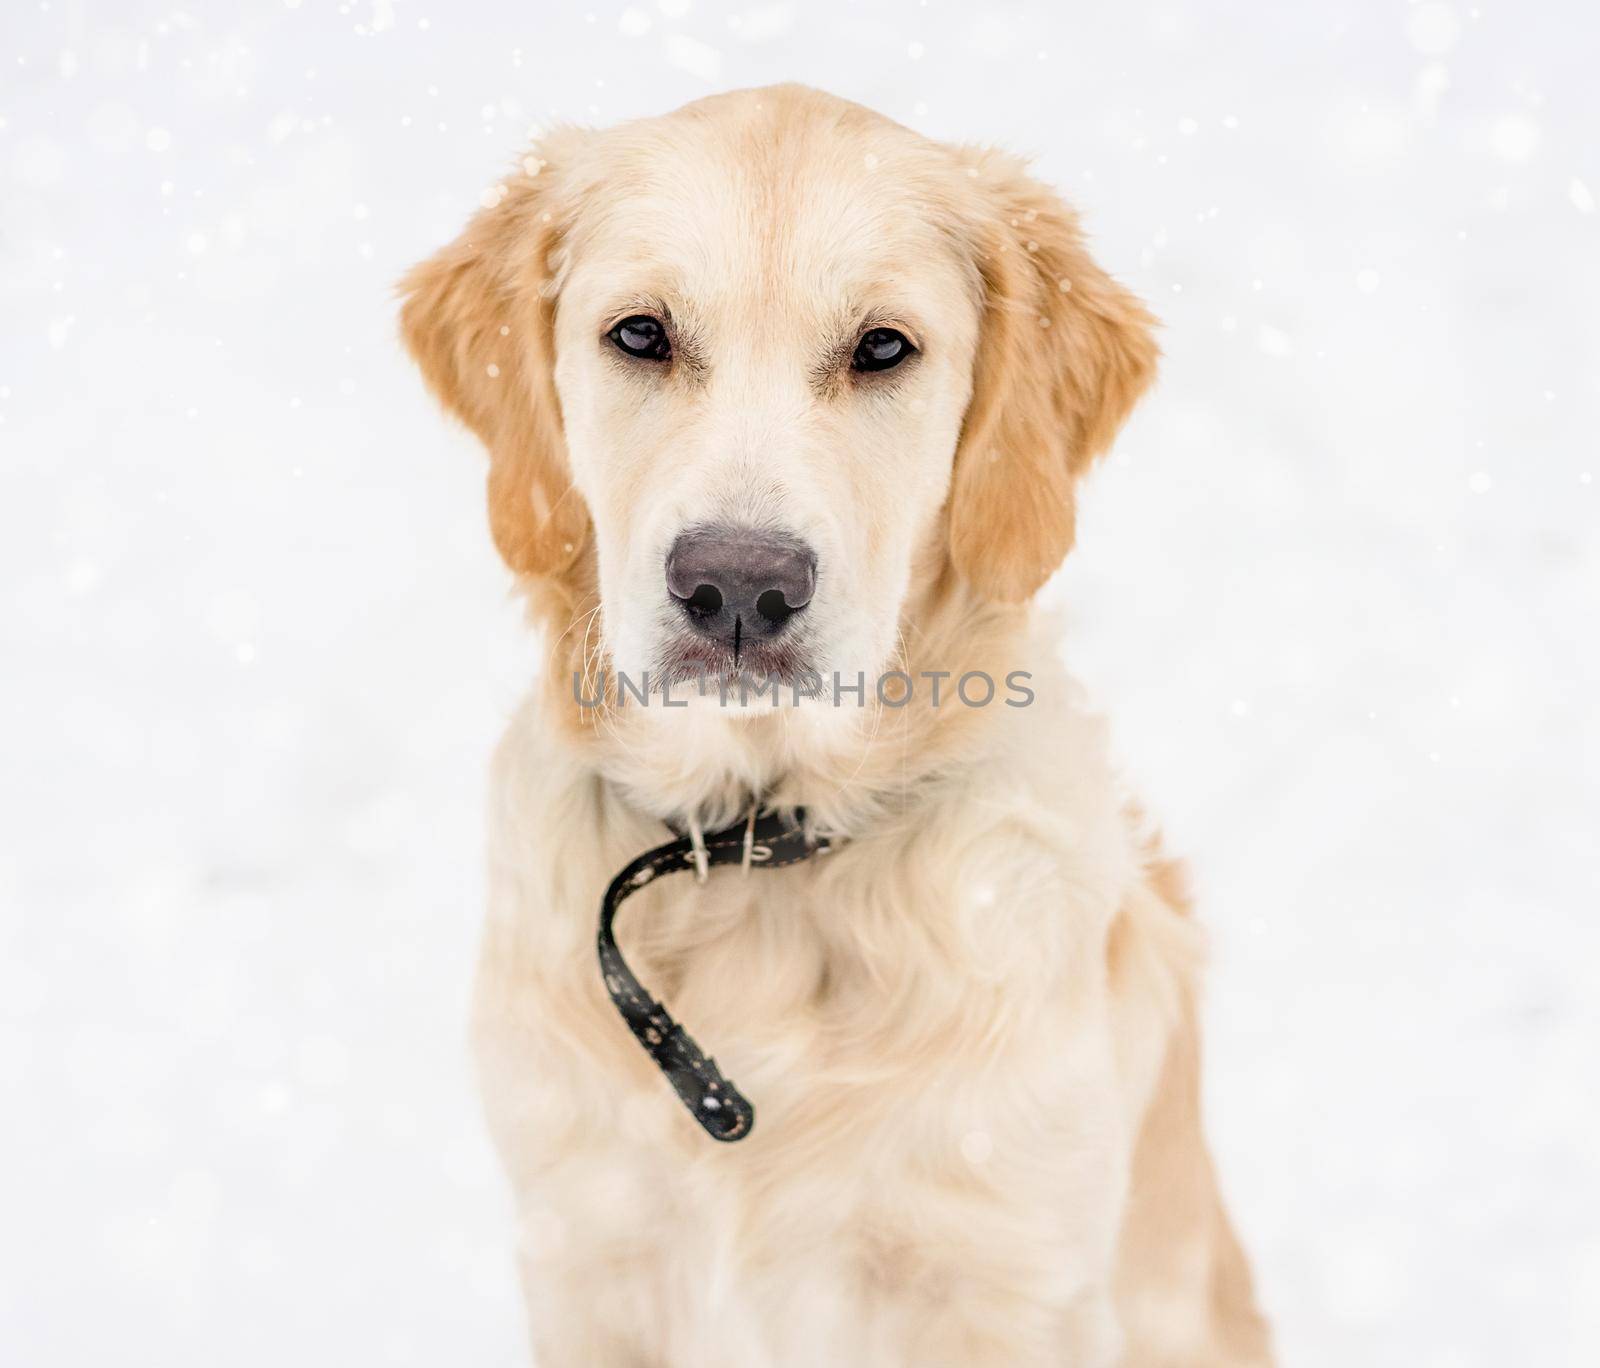 Cute dog muzzle with beautiful smart eyes in snowflakes